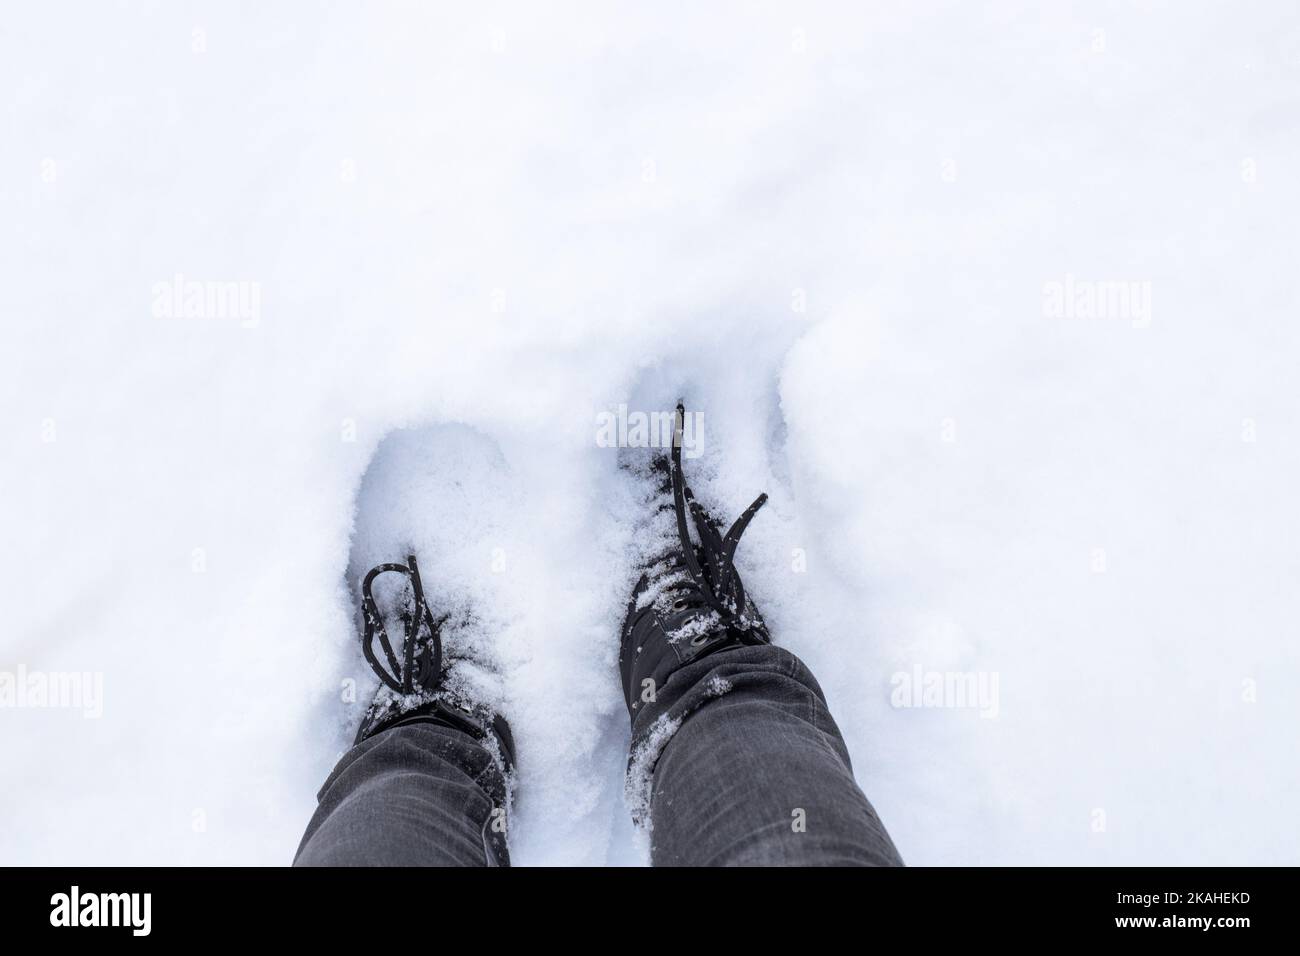 Walk along the snow path. Feet in boots are deep in the snow. Stock Photo